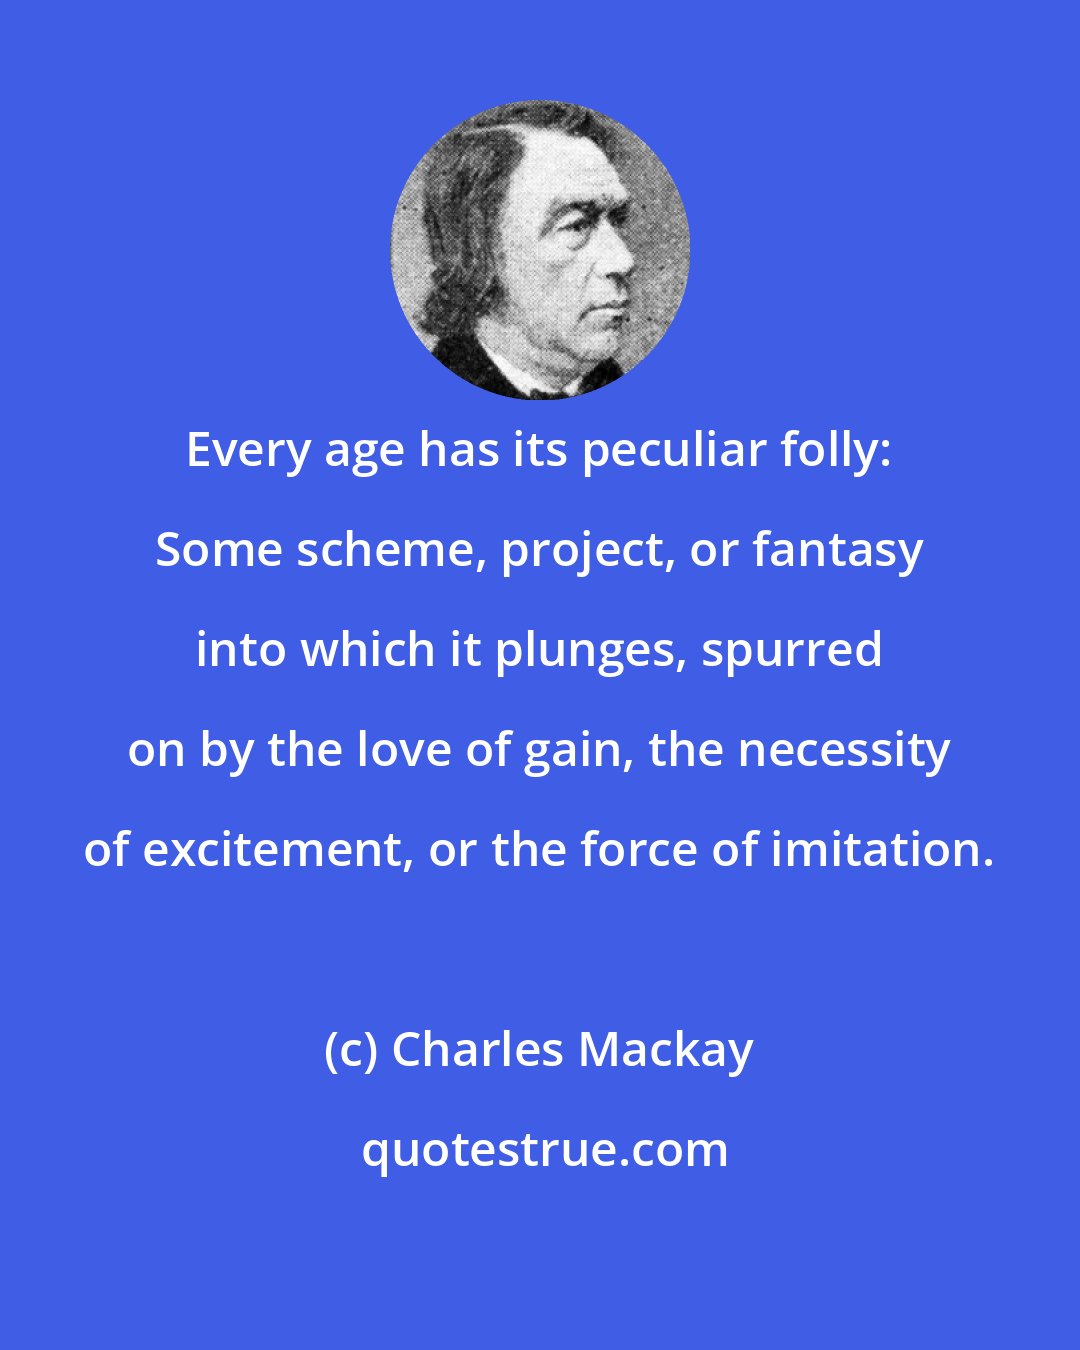 Charles Mackay: Every age has its peculiar folly: Some scheme, project, or fantasy into which it plunges, spurred on by the love of gain, the necessity of excitement, or the force of imitation.